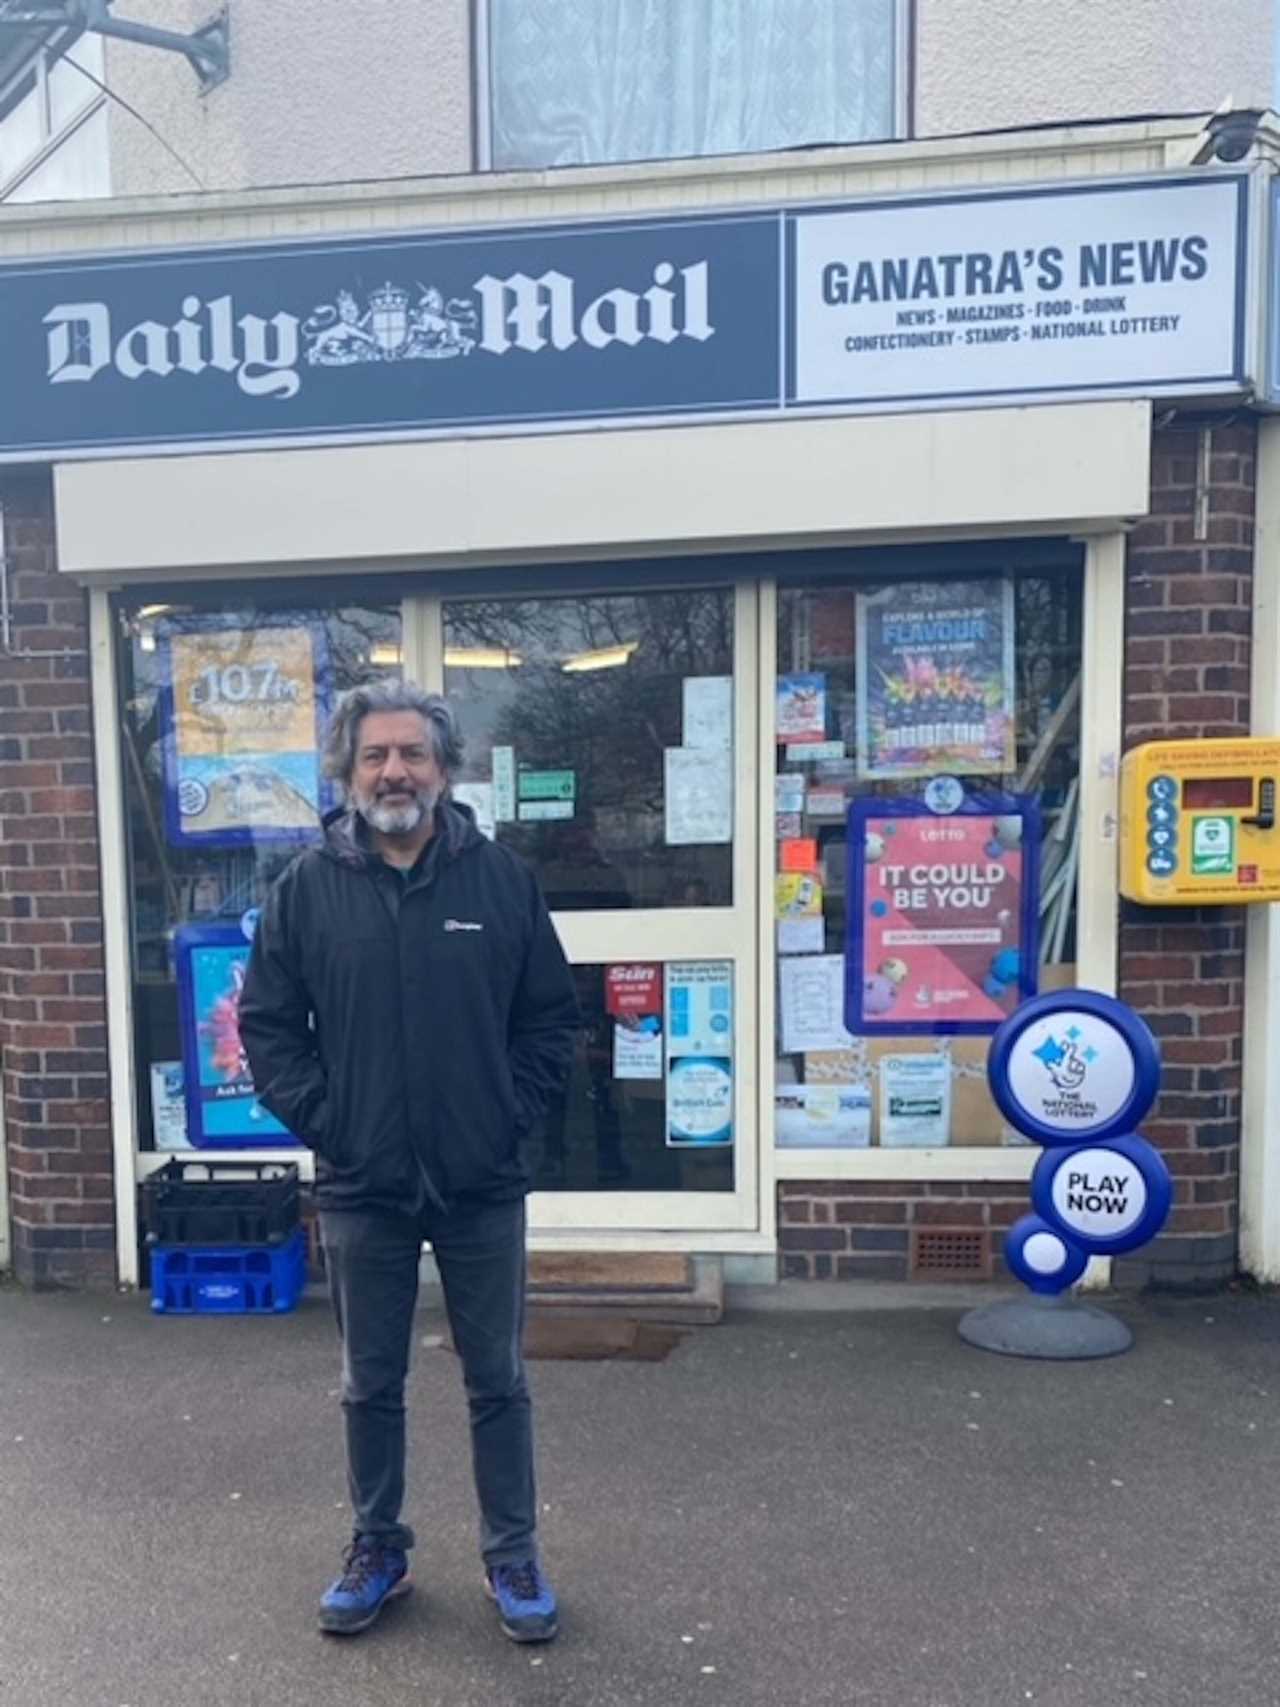 I was a big EastEnders star but quit after 12 years… now I stack shelves at my family’s newsagents, says Nitin Ganatra